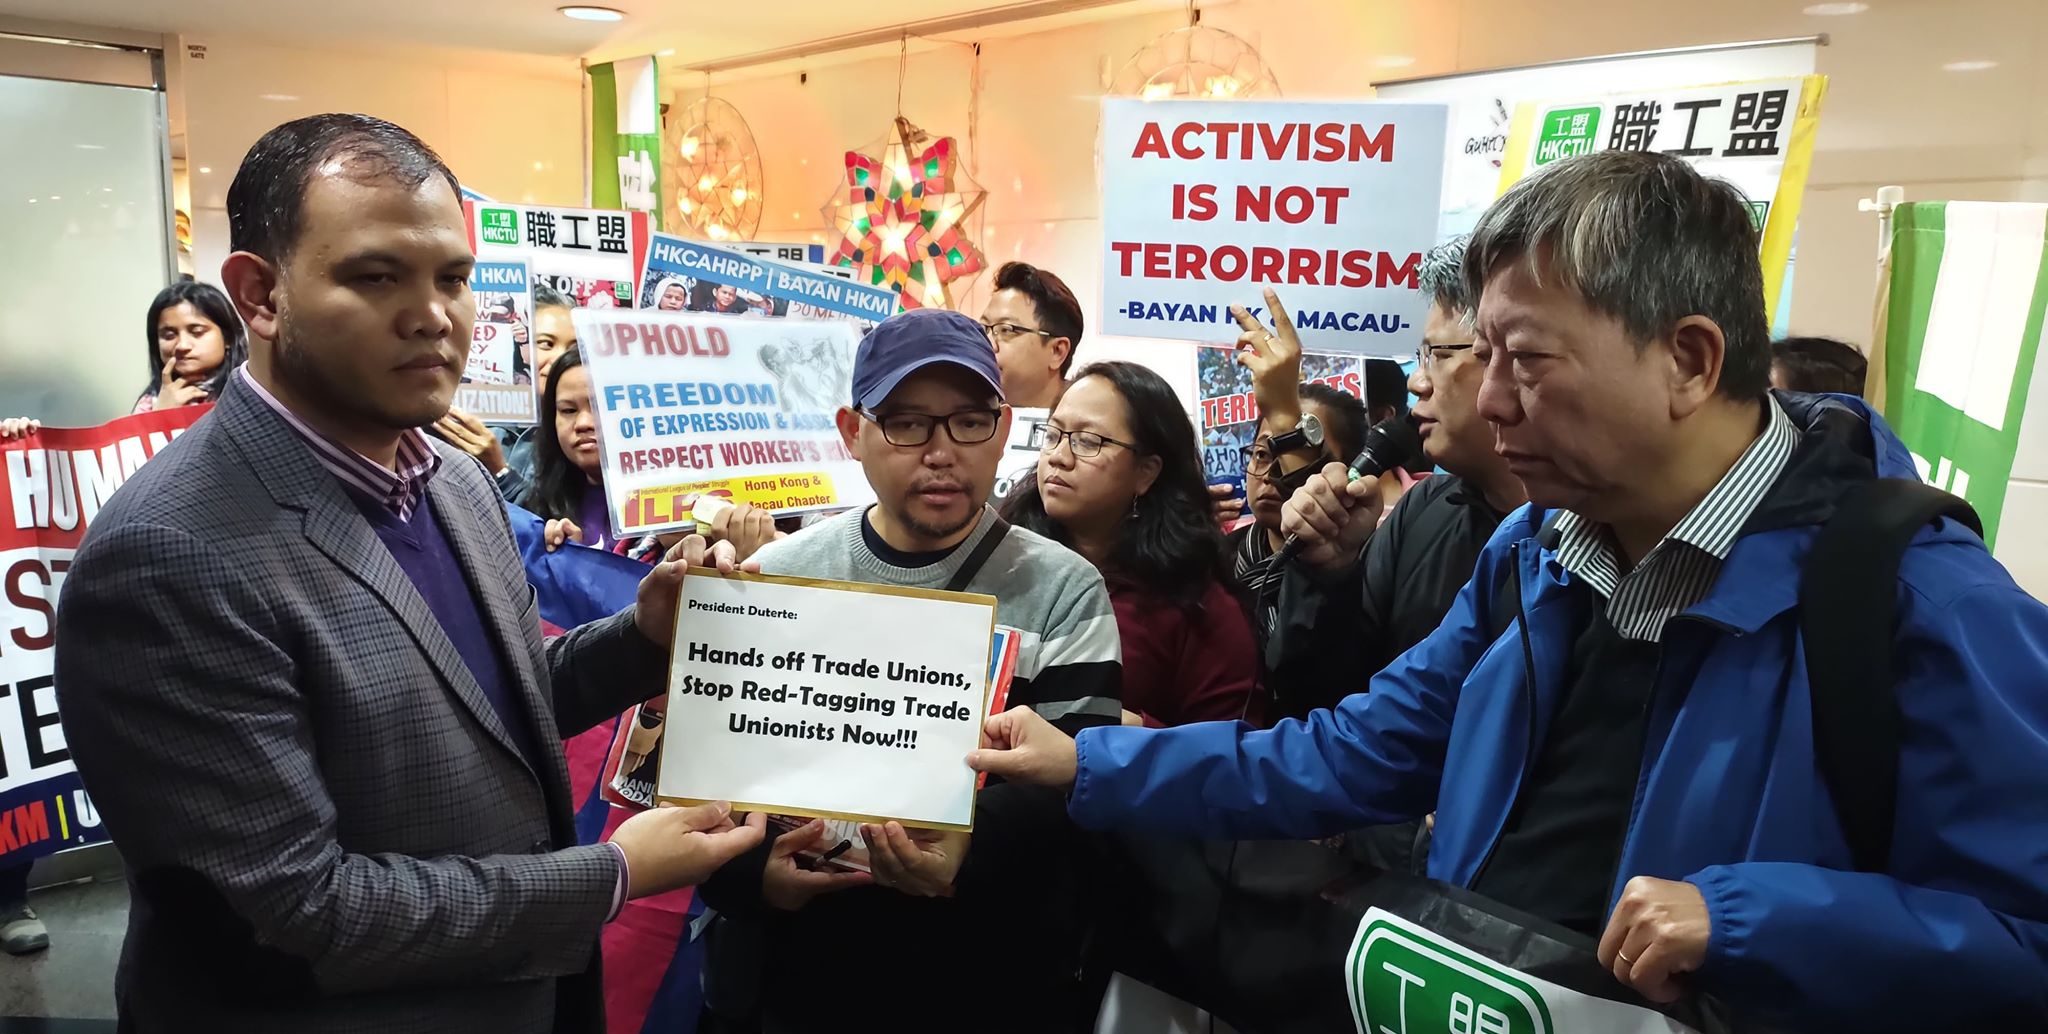 Human rights violations perpetuated by Philippine government